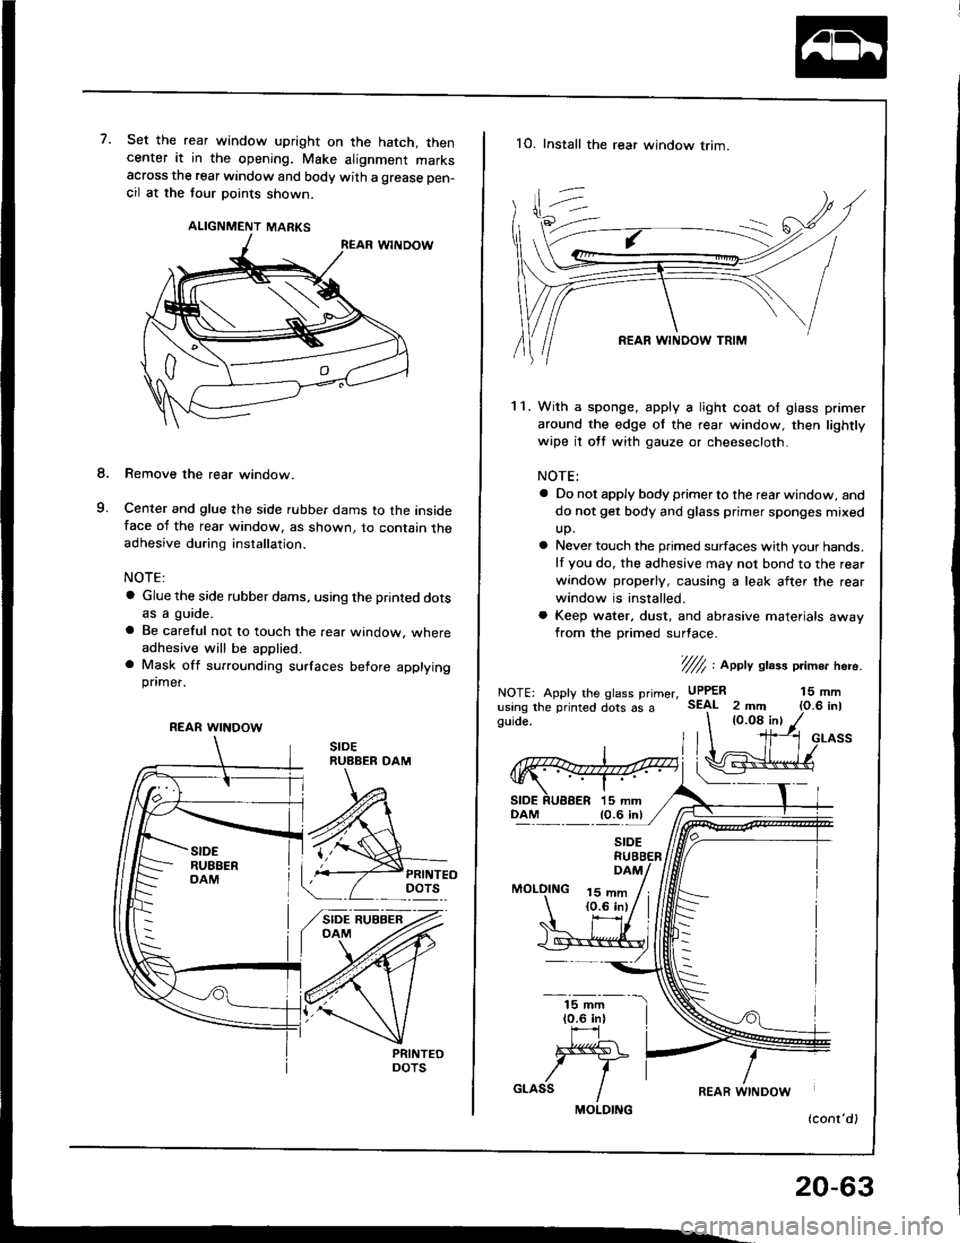 HONDA INTEGRA 1994 4.G Workshop Manual 7.Set the rear window upright on the hatch, thencenter it in the opening. Make alignment marksacross the rear window and body with a grease pen-
cil at the tour points shown.
ALIGNMENT MARKS
Remove th